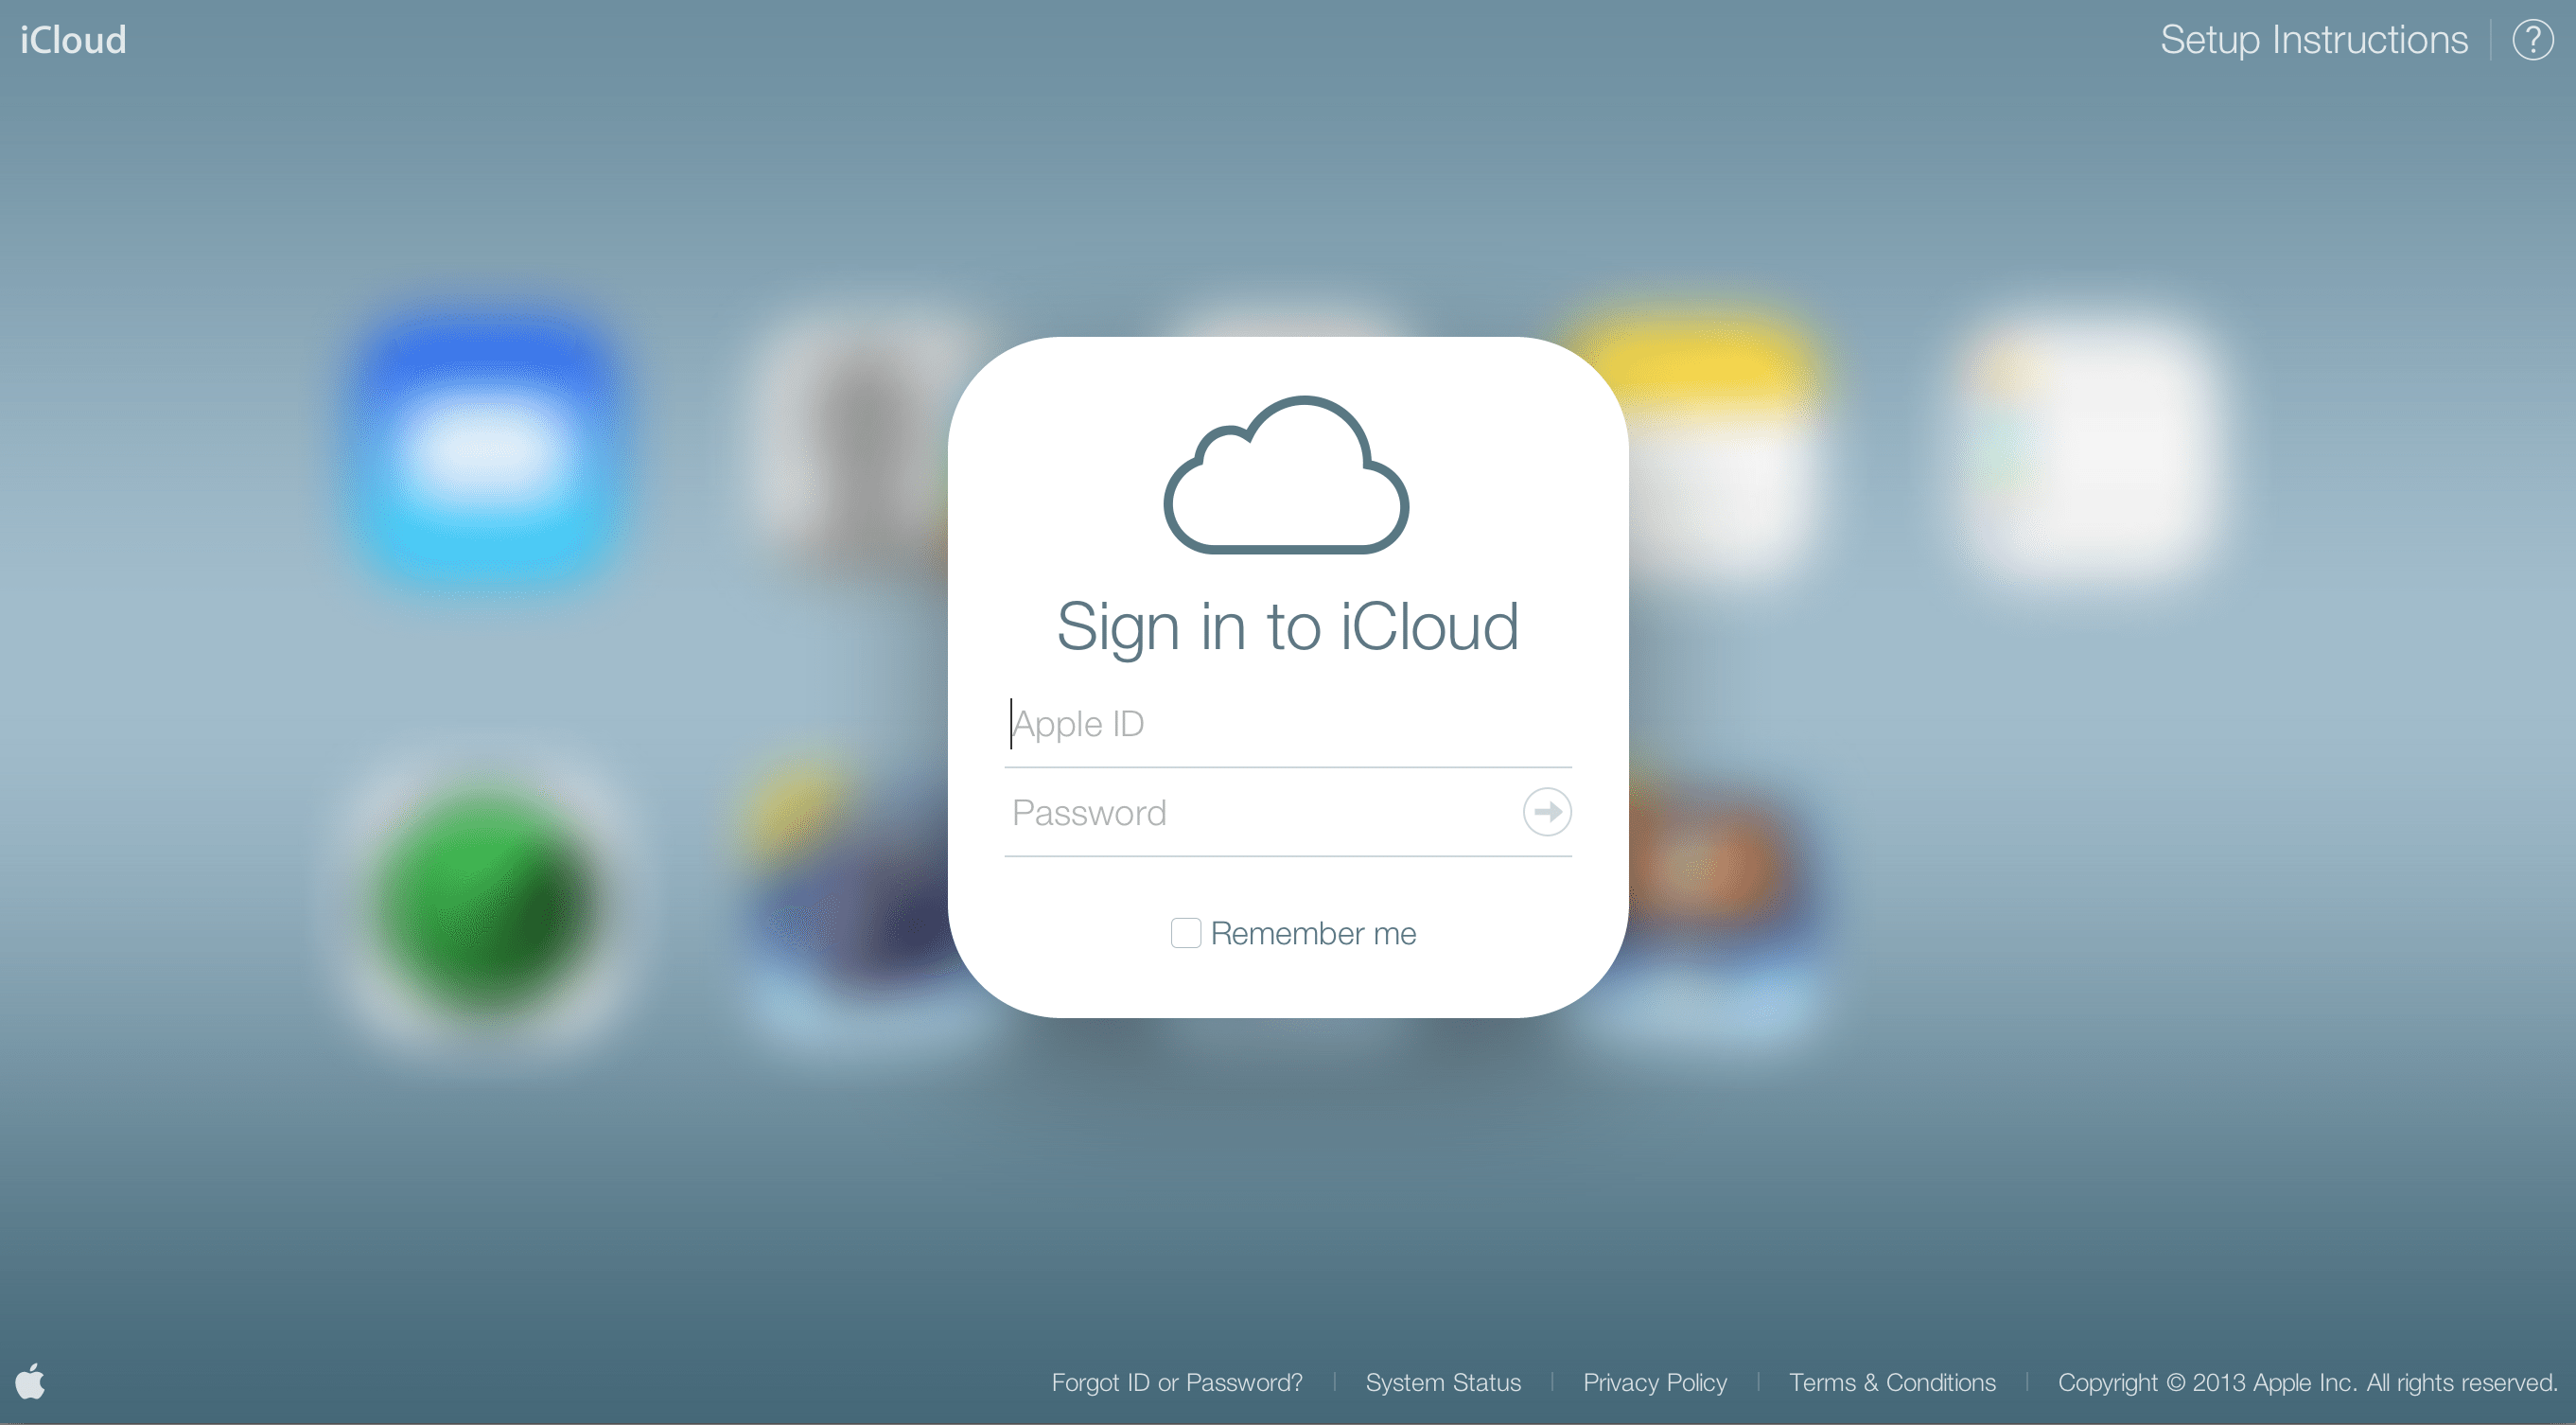 Apple filing shows move from azure to google cloud for icloud services - onmsft. Com - february 26, 2018